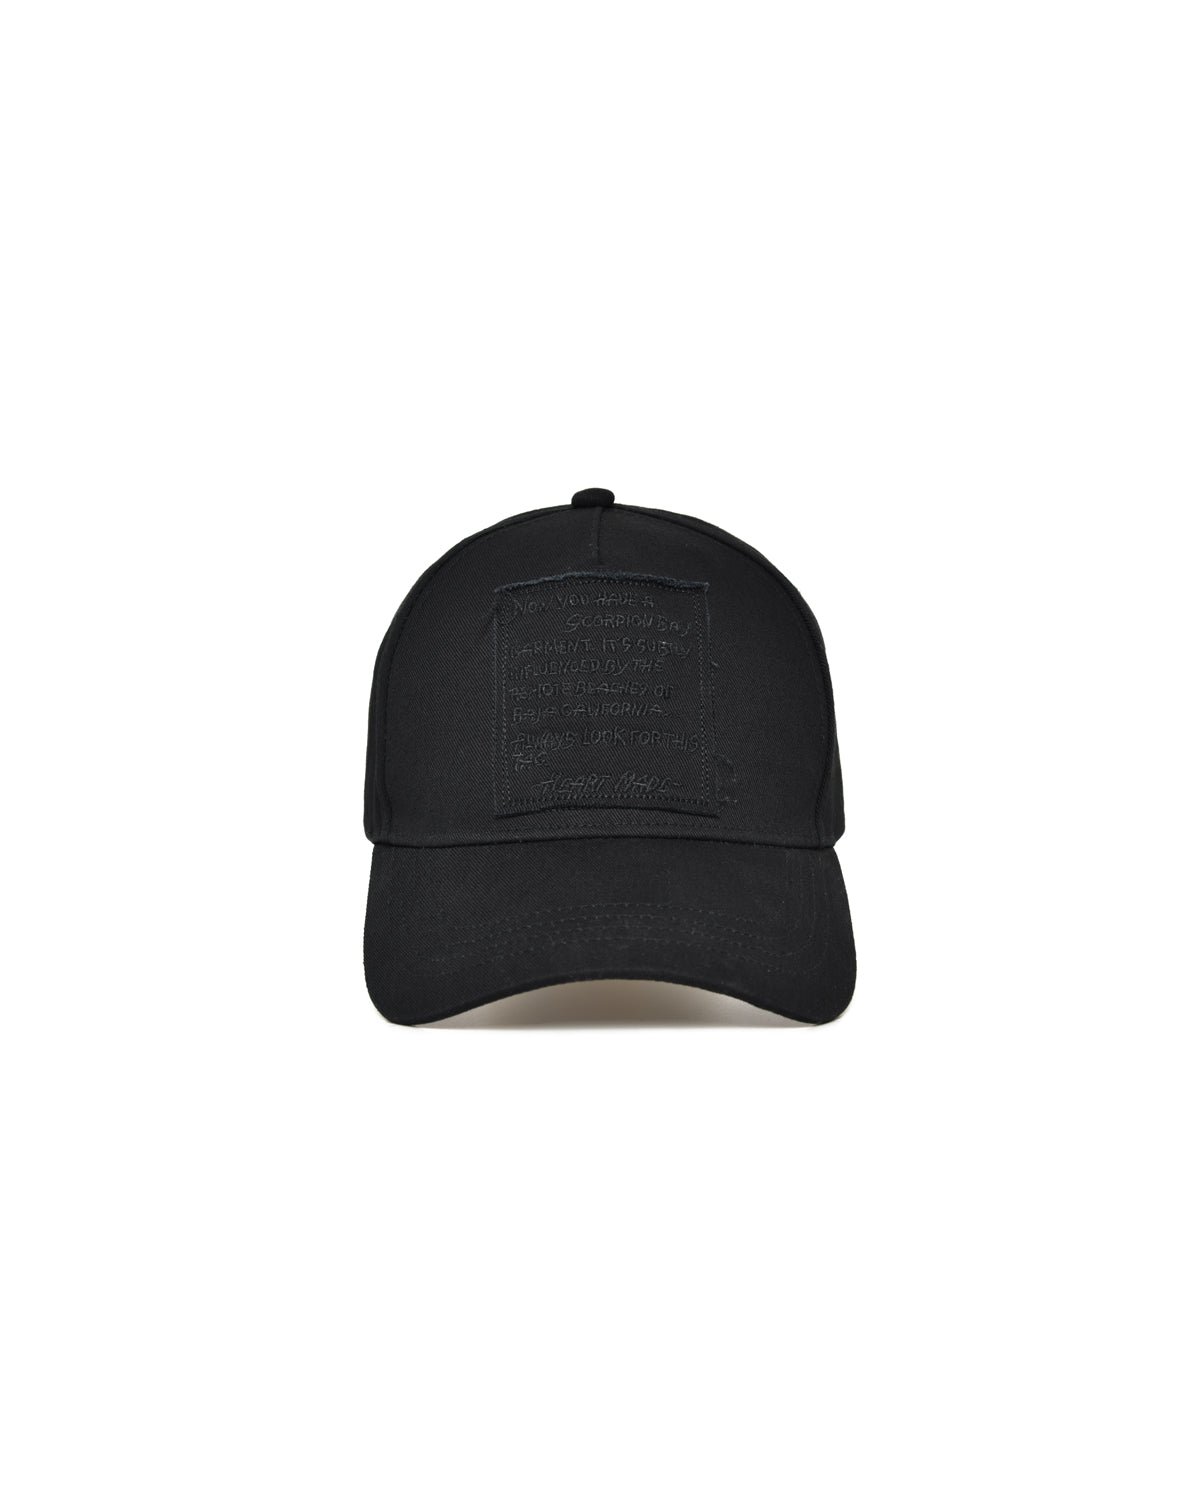 Black 100% Cotton Baseball Cap With Embroidered Vanlife Label